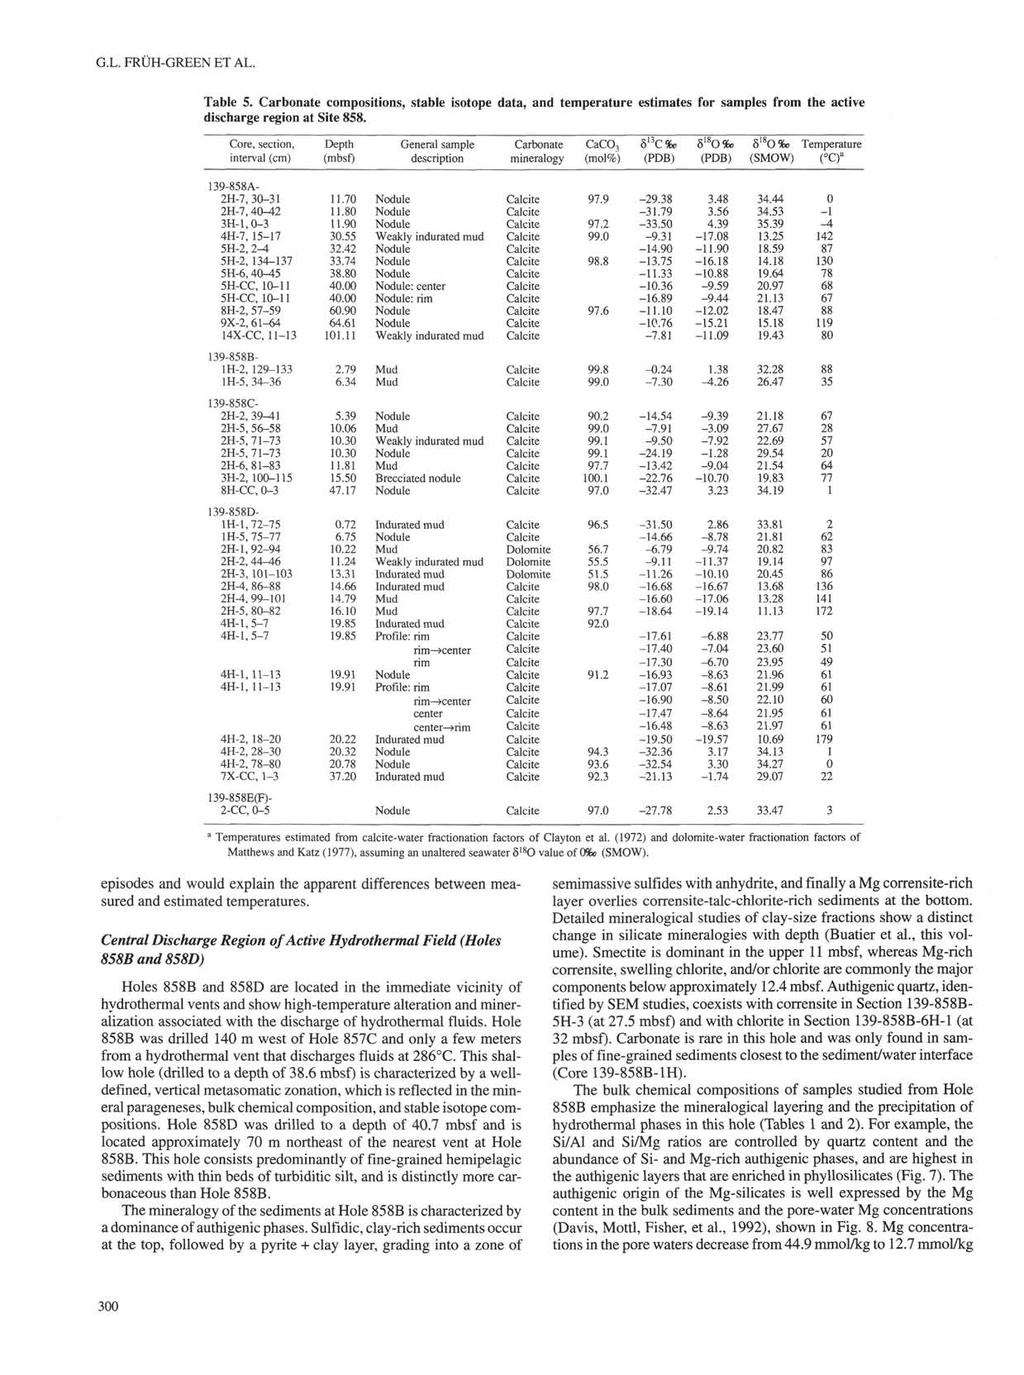 G.L. FRUH-GREEN ET AL. Table 5. Carbonate compositions, stable isotope data, and temperature estimates for samples from the active discharge region at Site 858.